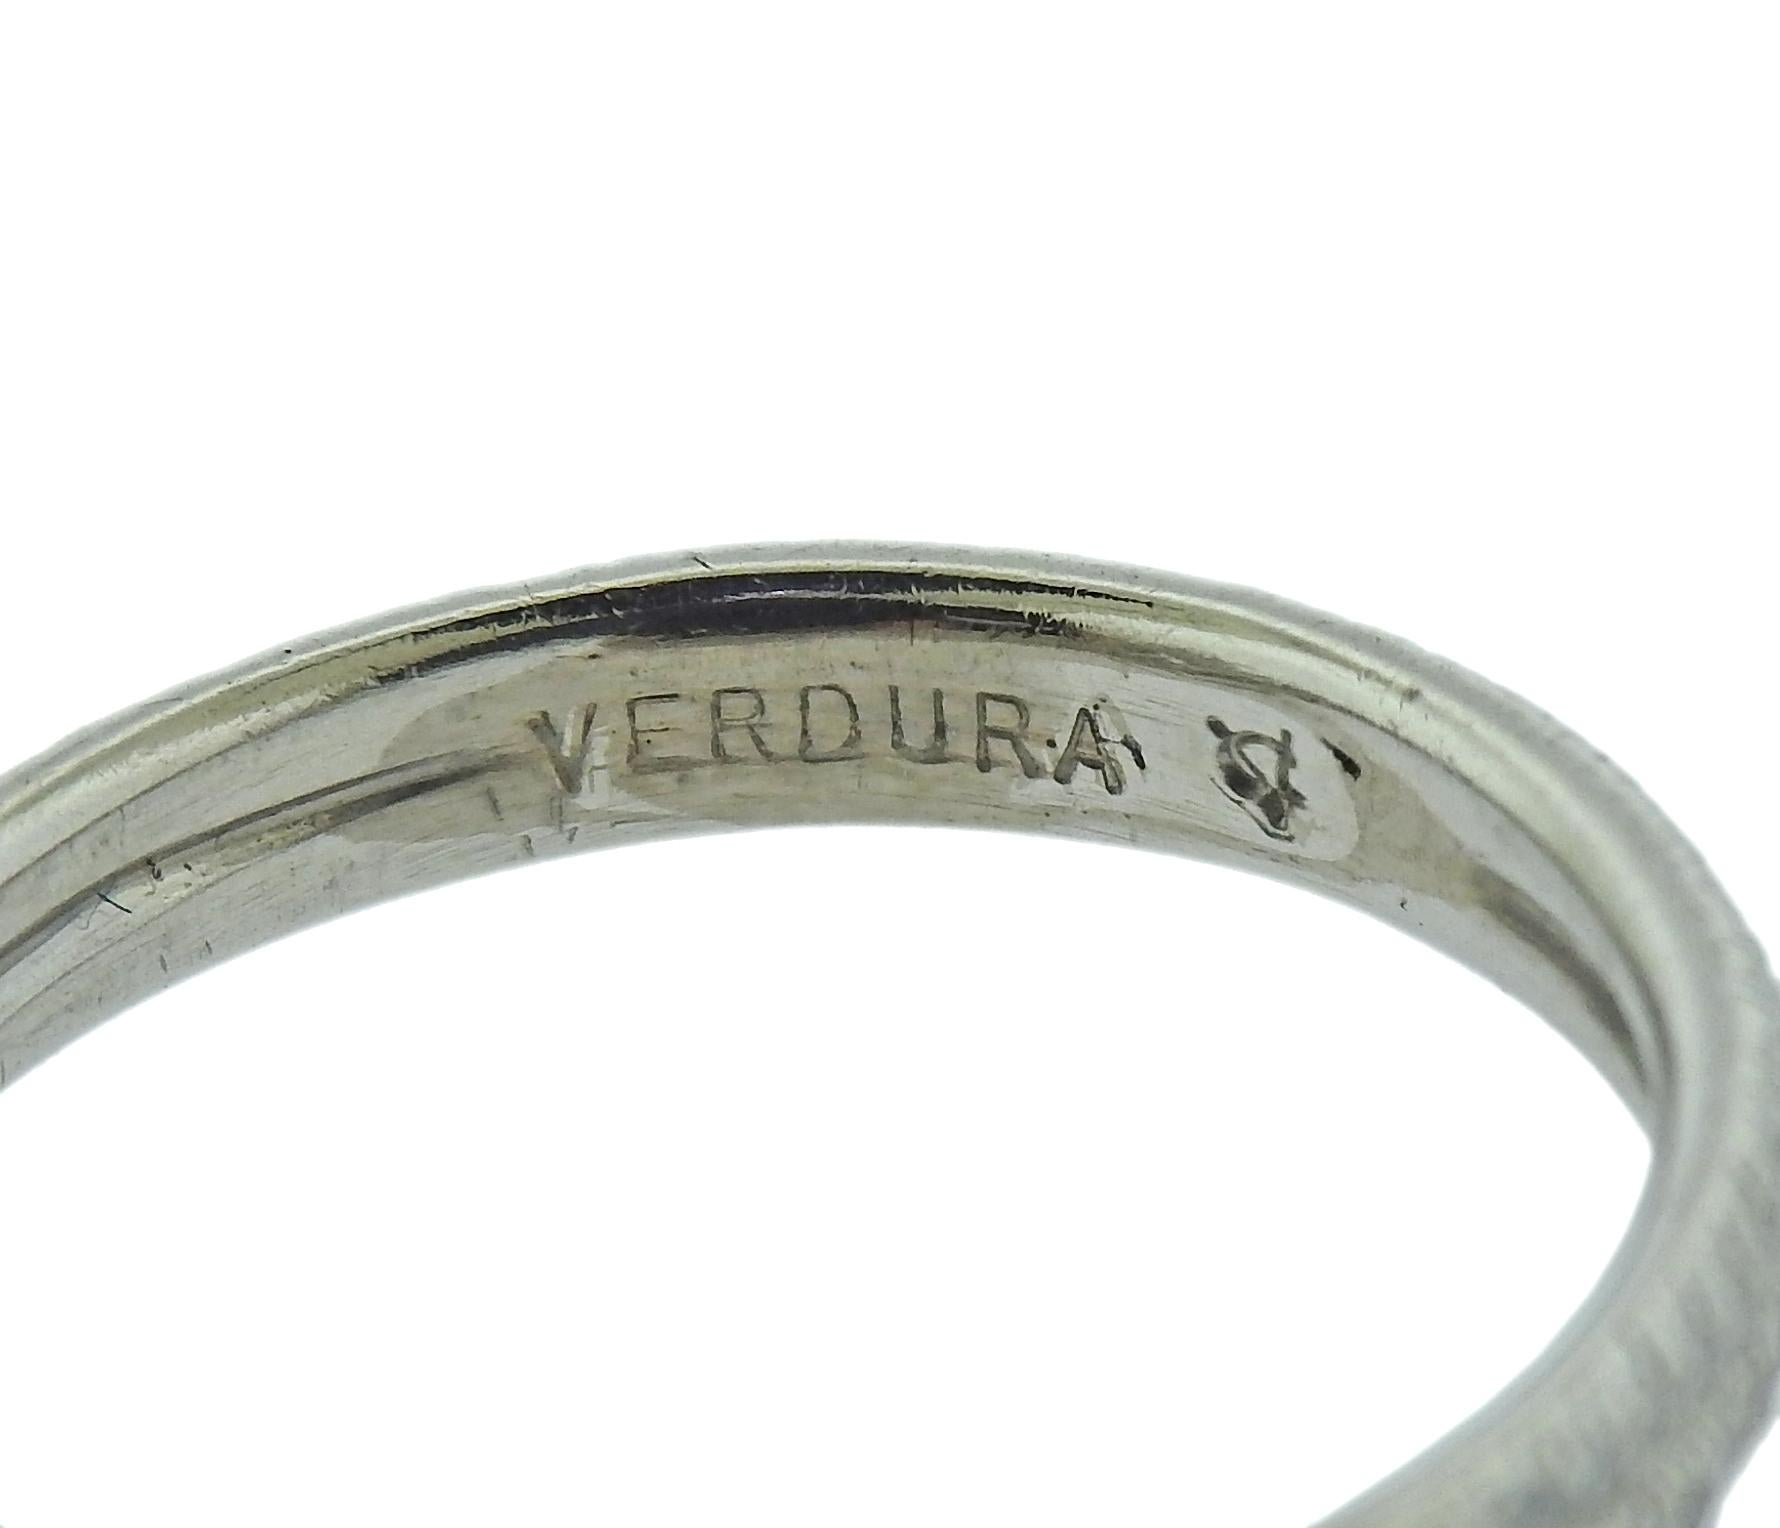 Verdura 18k white gold two row eternity wedding band , with  micro pave set diamonds - approx. 0.40ctw. Ring size - 6.5, ring is 3mm wide. Marked: Verdura and maker's symbol. Weight - 3.2 grams.